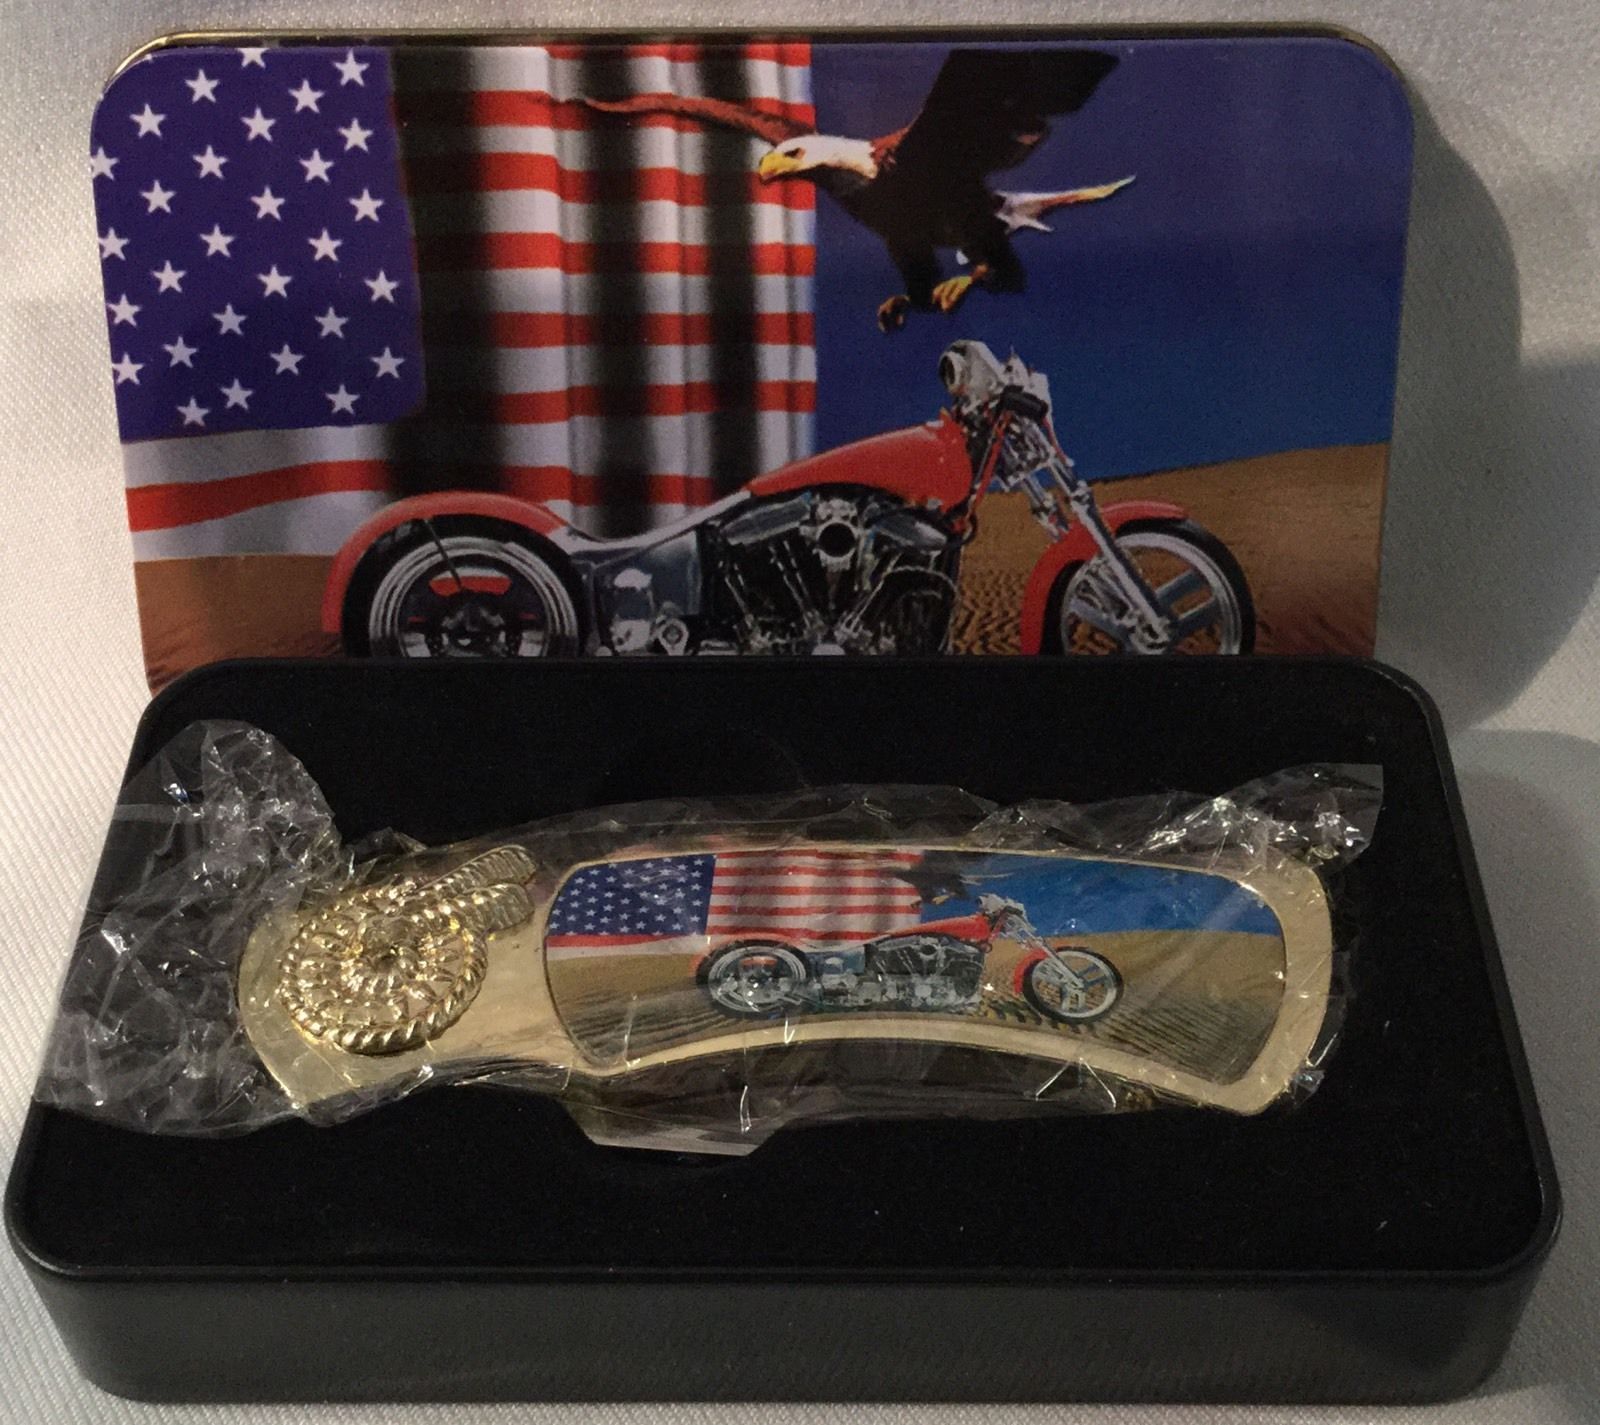 Collectible Pocket Knife In Case - Patriotic Eagle, Flag, Motorcycle Design NEW - $12.78